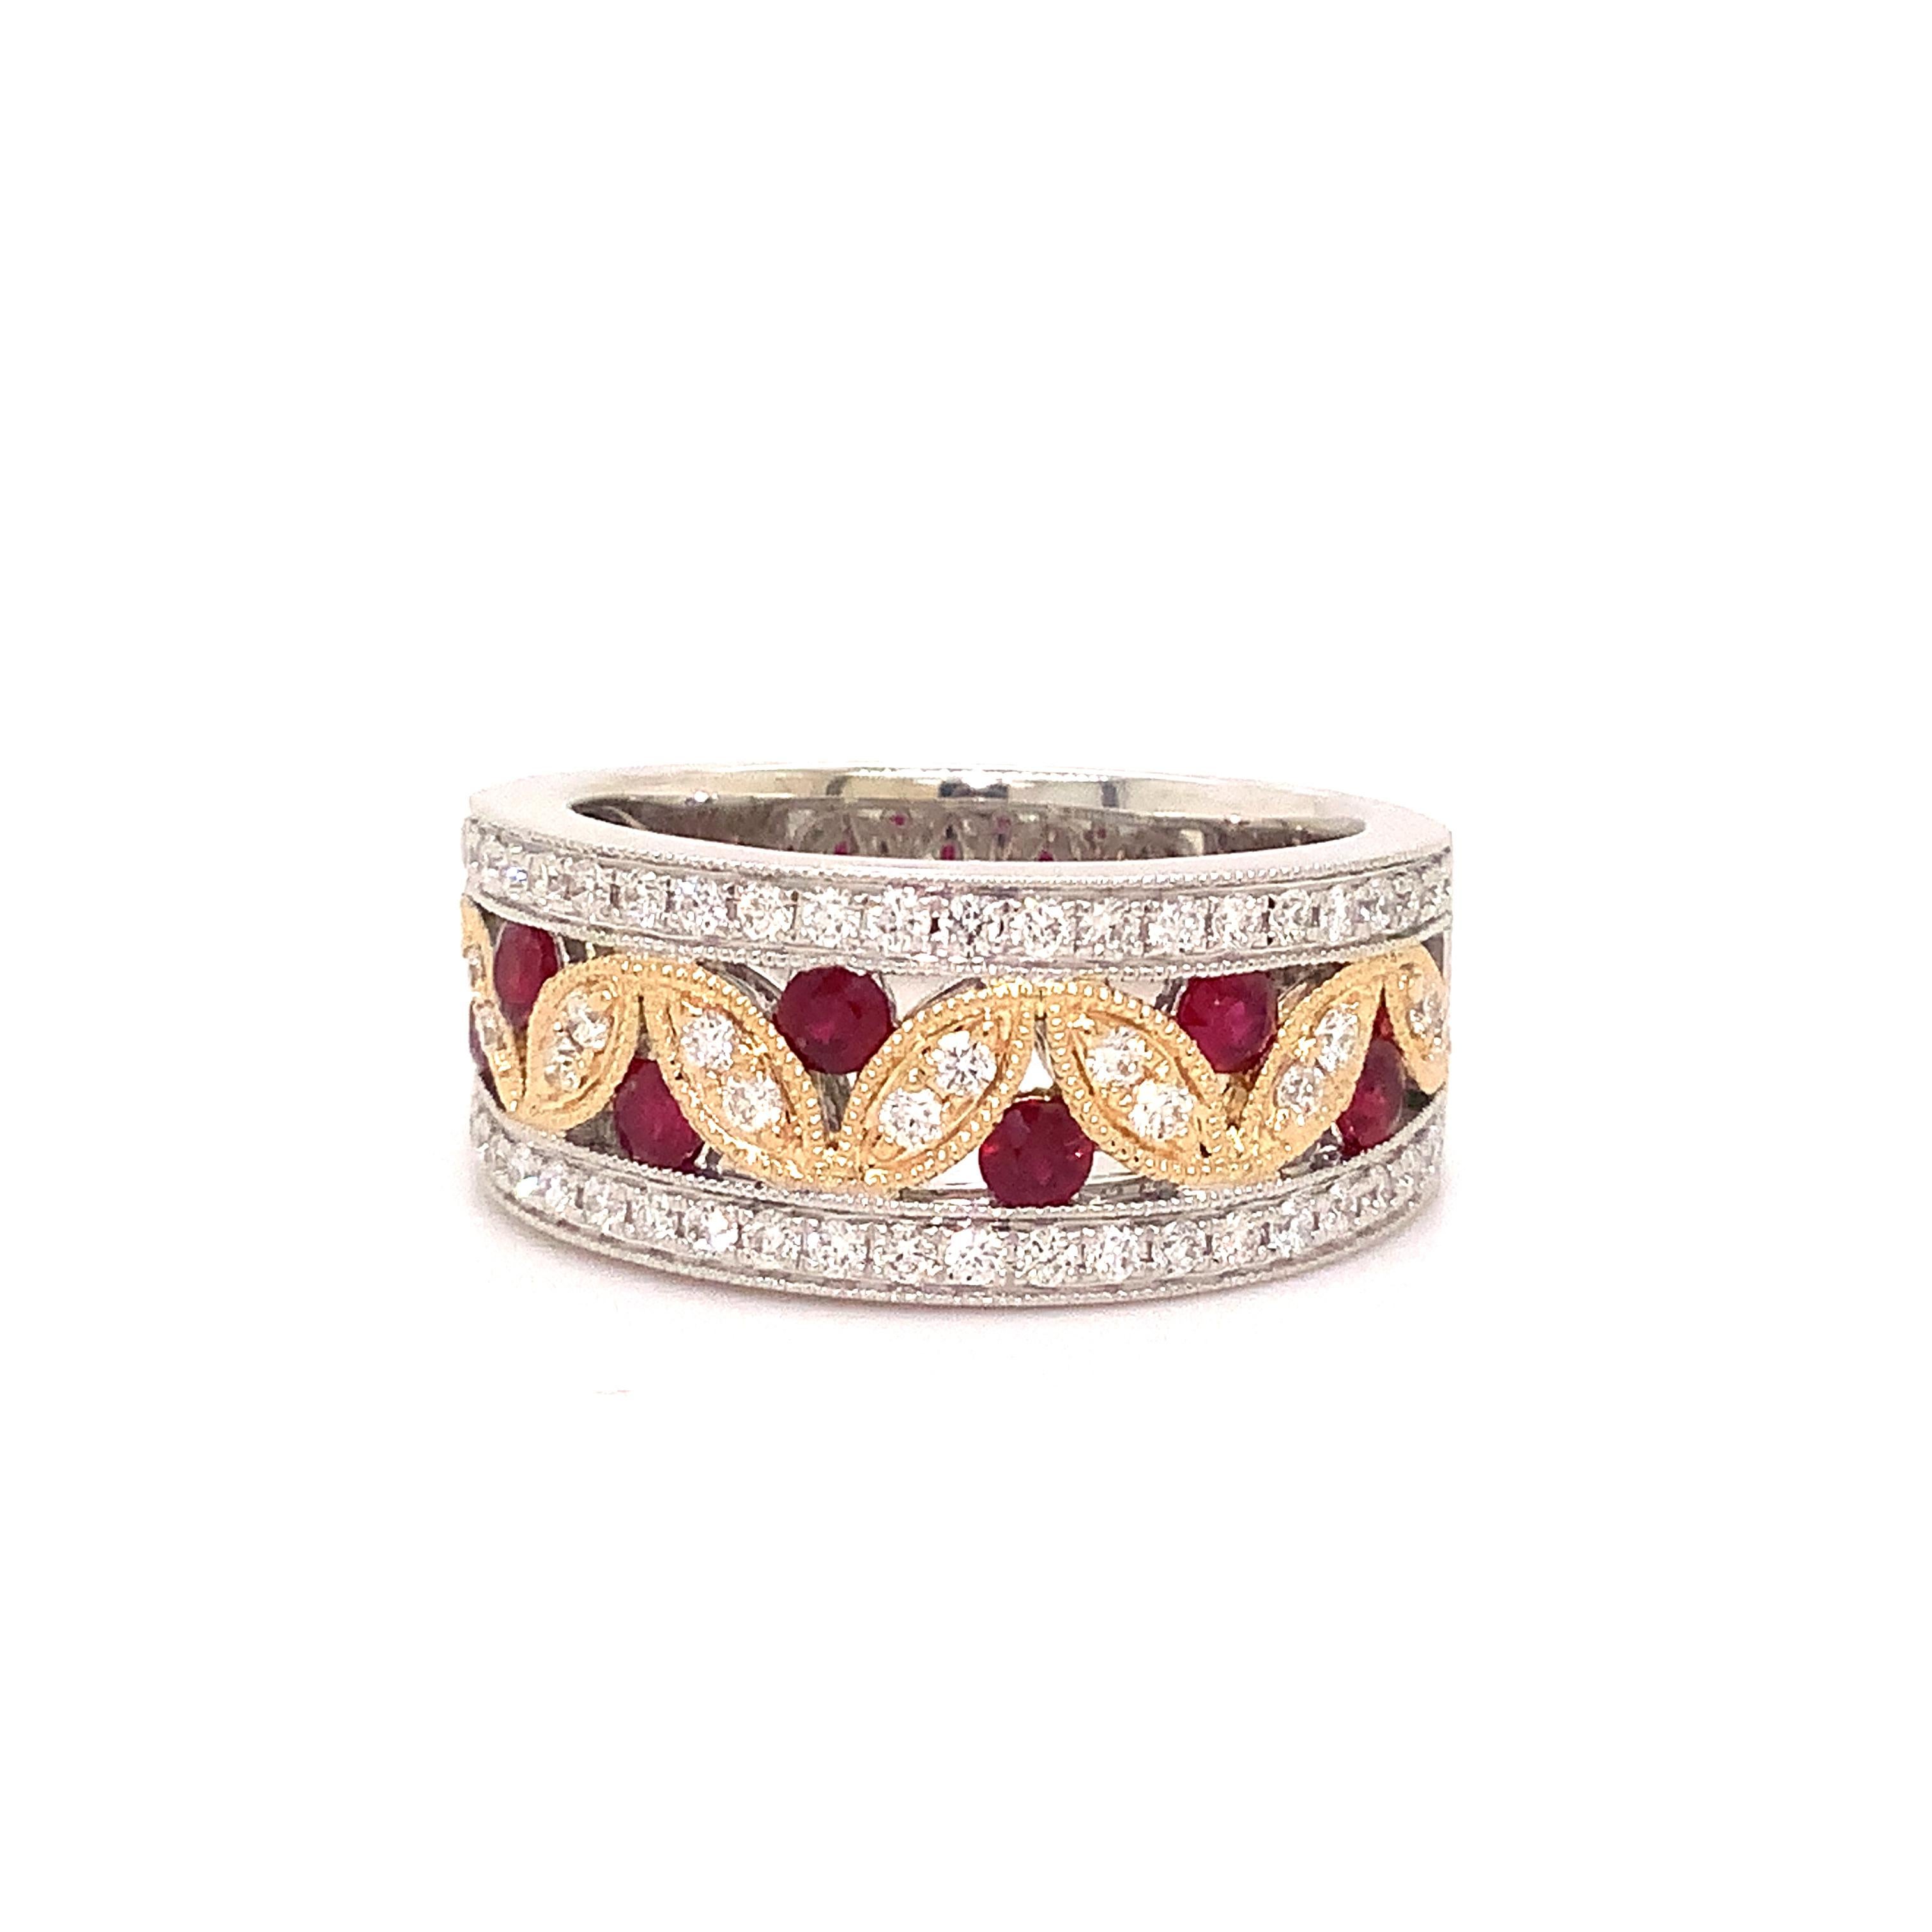 Roman + Jules Ruby and Diamond Band set in 14K White and Yellow Gold
This antique-inspired wide Ruby and Diamond band design has milgrain detailing on the yellow and white gold, highlighting these Vibrant Red Rubies. This Ring is the perfect way to